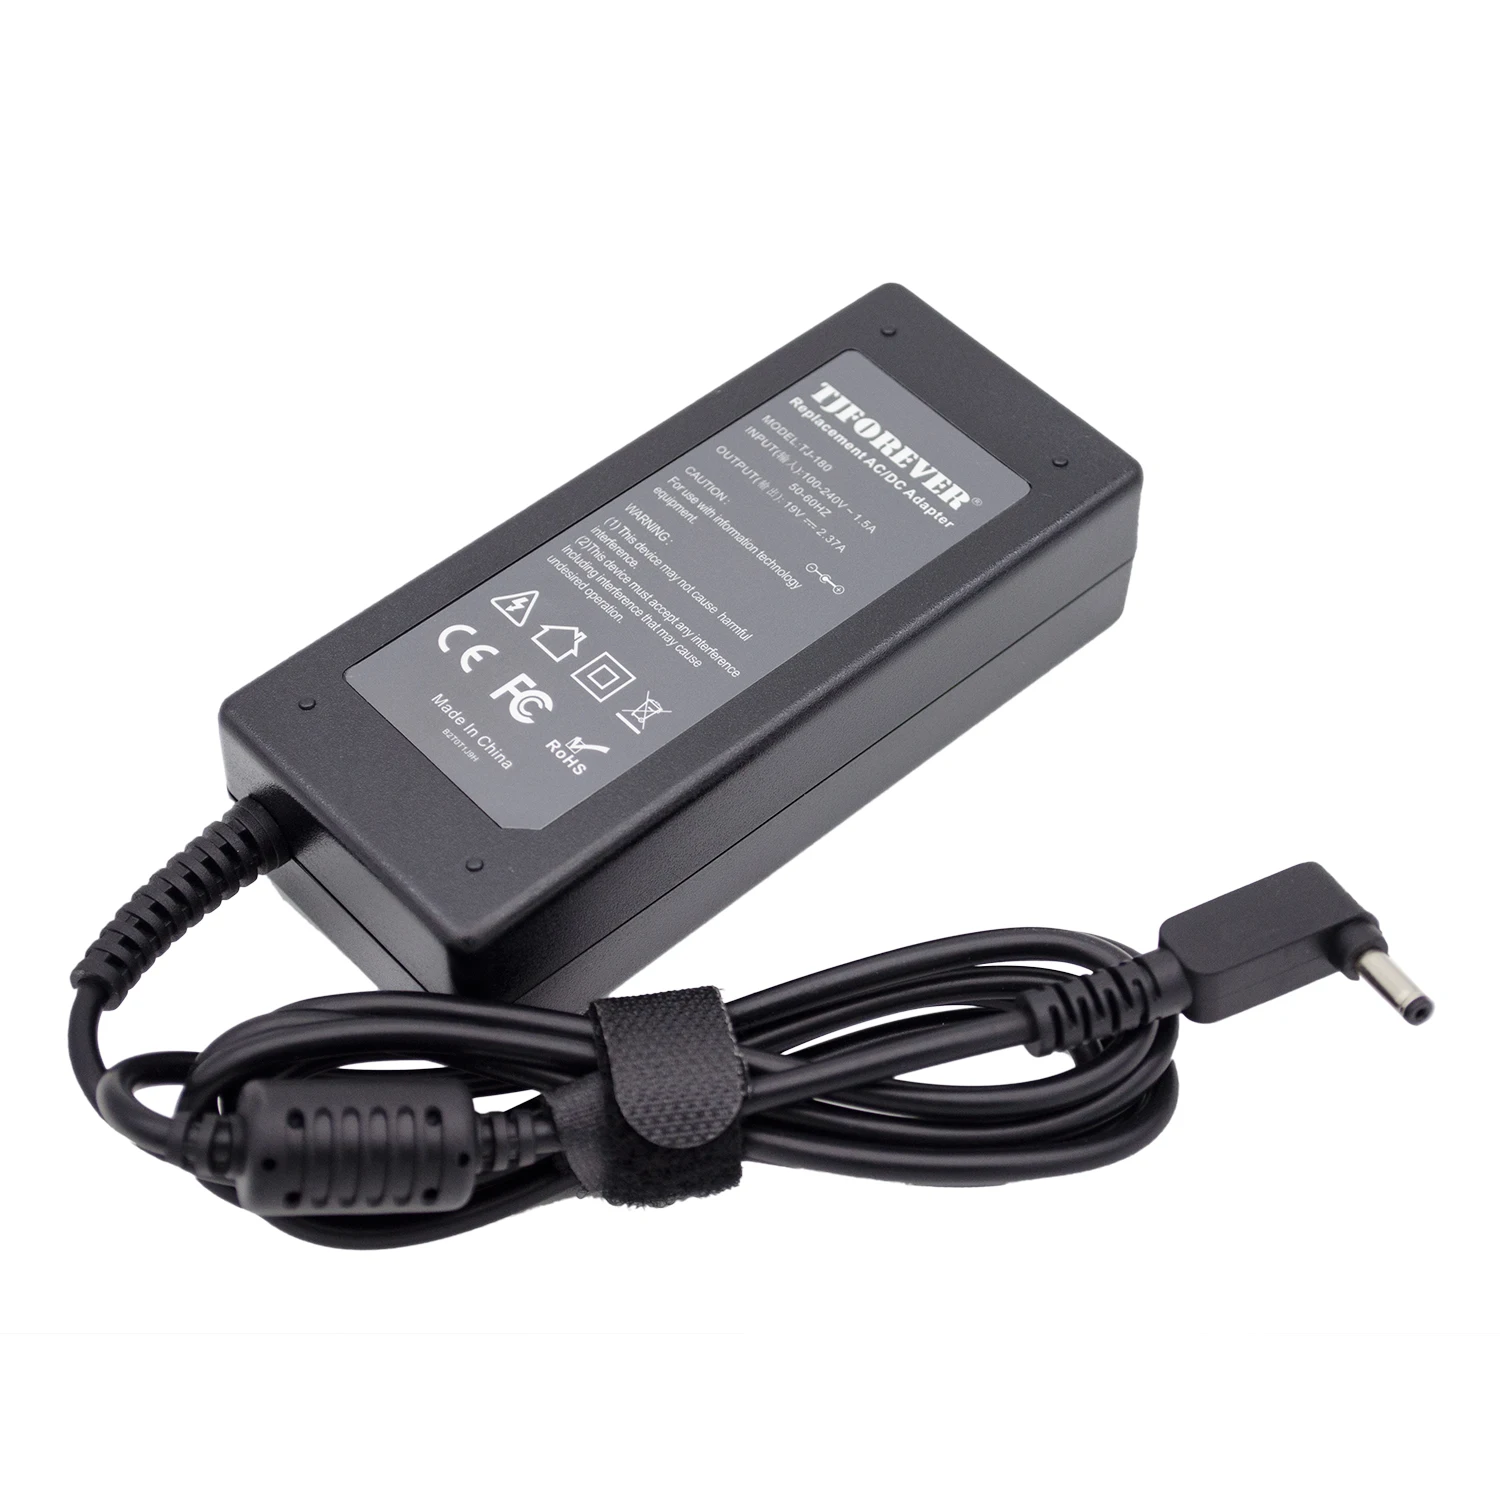 33W 19V1.75A 4.0*1.35mm laptop adapter for Asus laptop From m.alibaba.com